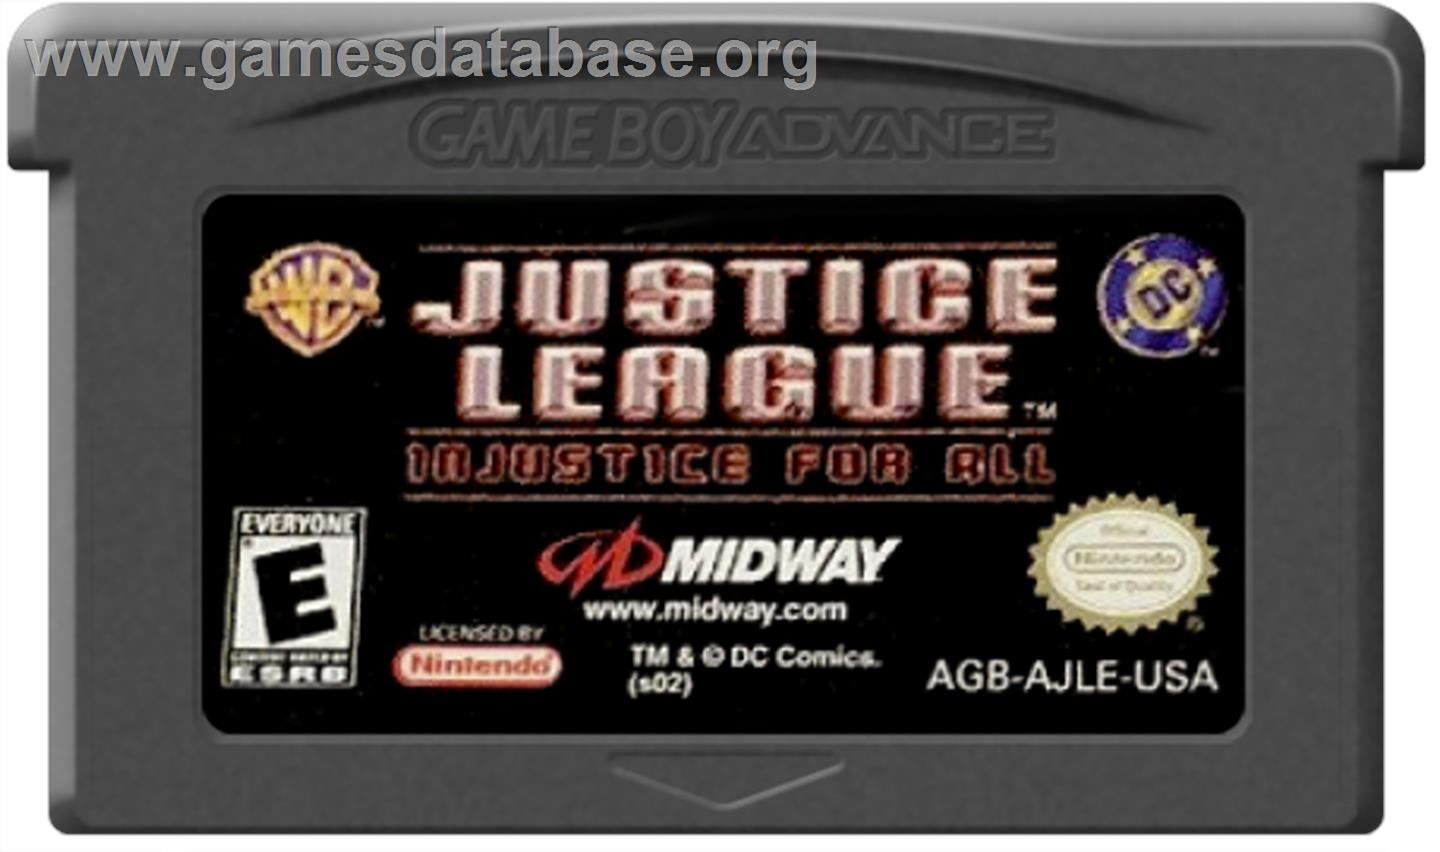 Justice League: Injustice for All - Nintendo Game Boy Advance - Artwork - Cartridge